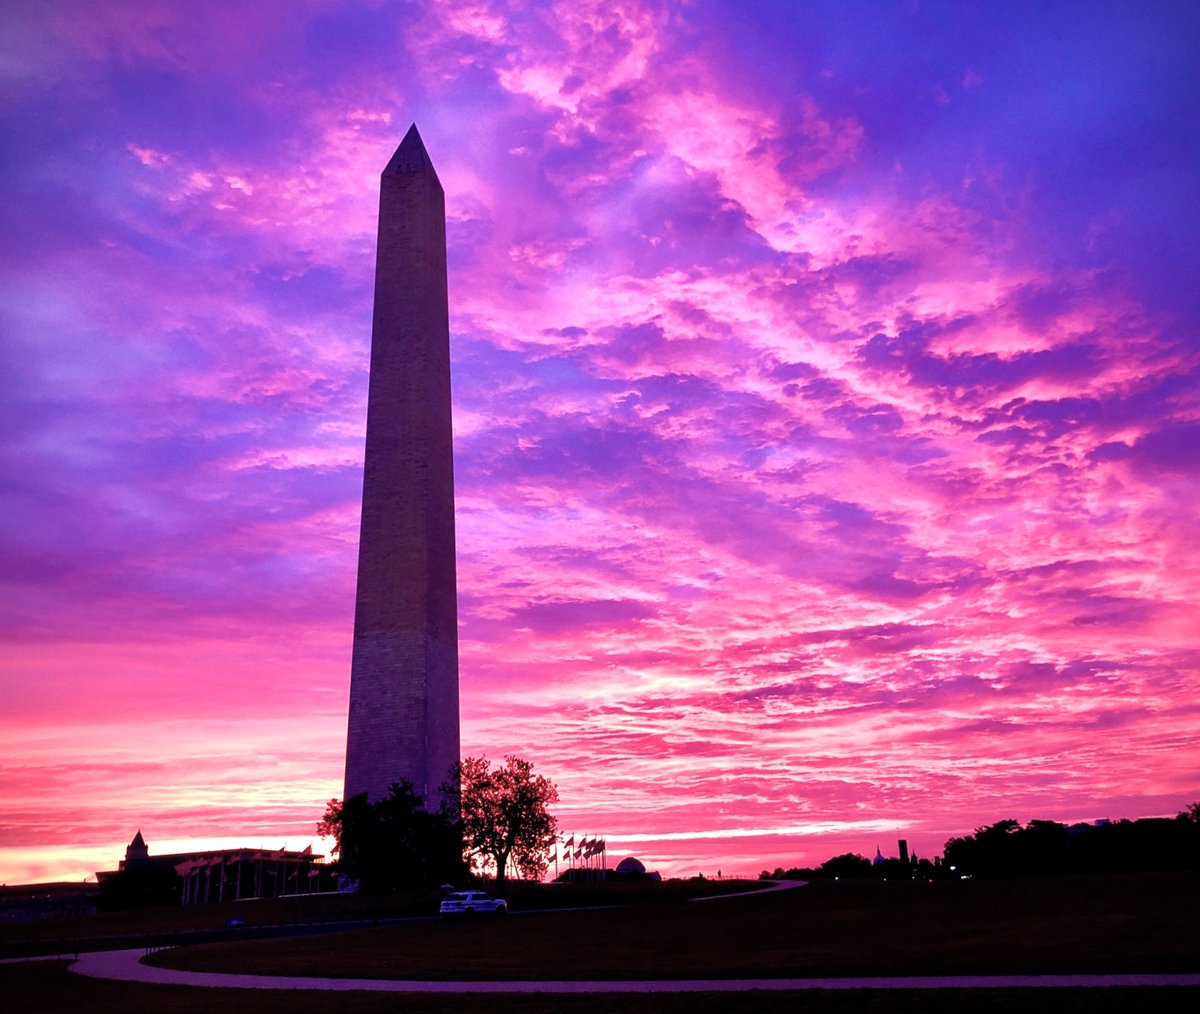 What a gorgeous sunrise this morning! The clouds glowed pink & purple in the sky above the Washington Monument. This kind of beauty is worth getting out of bed early. #WashingtonDC #sunrise